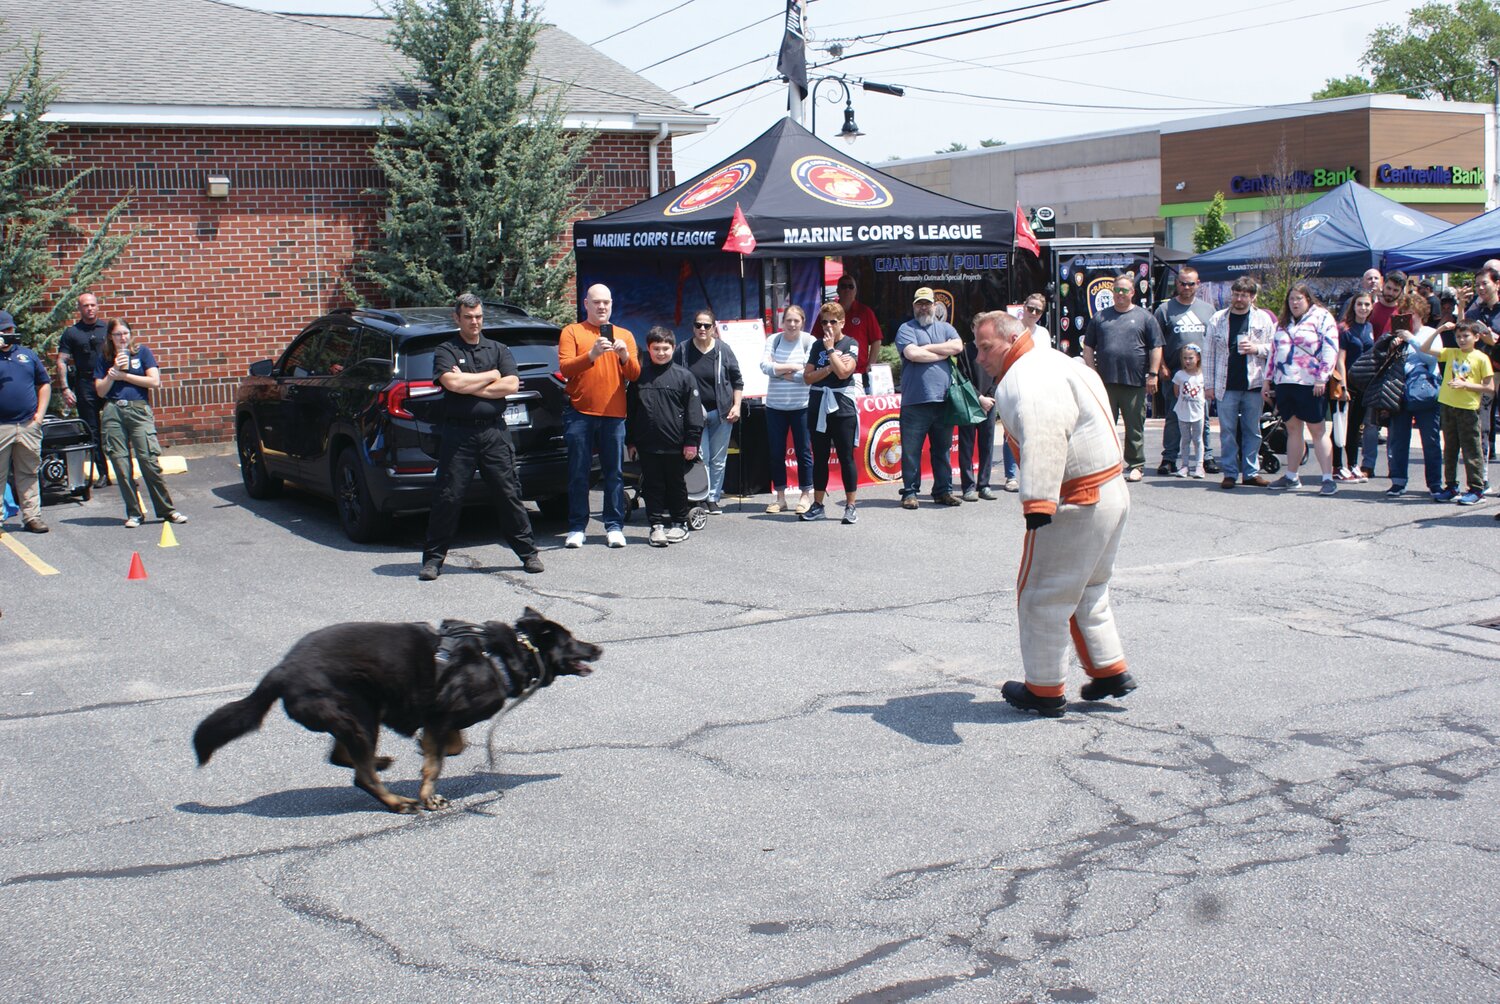 DOG DAY OUT: Zuess the canine demonstrated his amazing training by attacking Officer Shane O’Donnell on command.